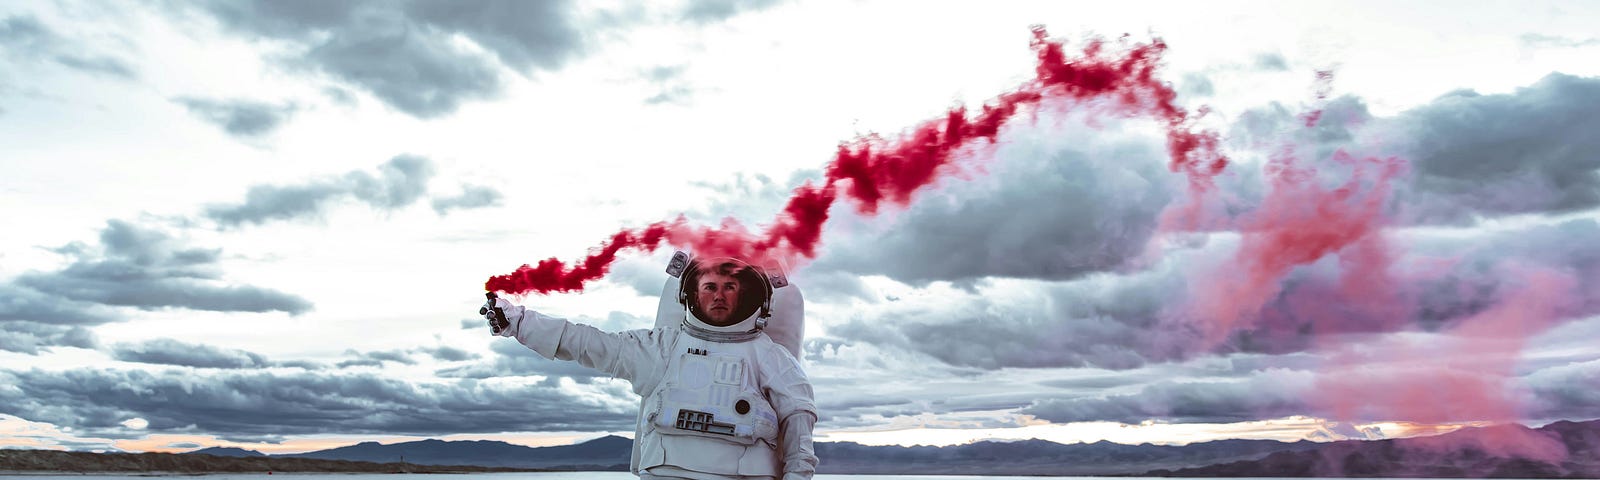 man in spacesuit holding a signal flare